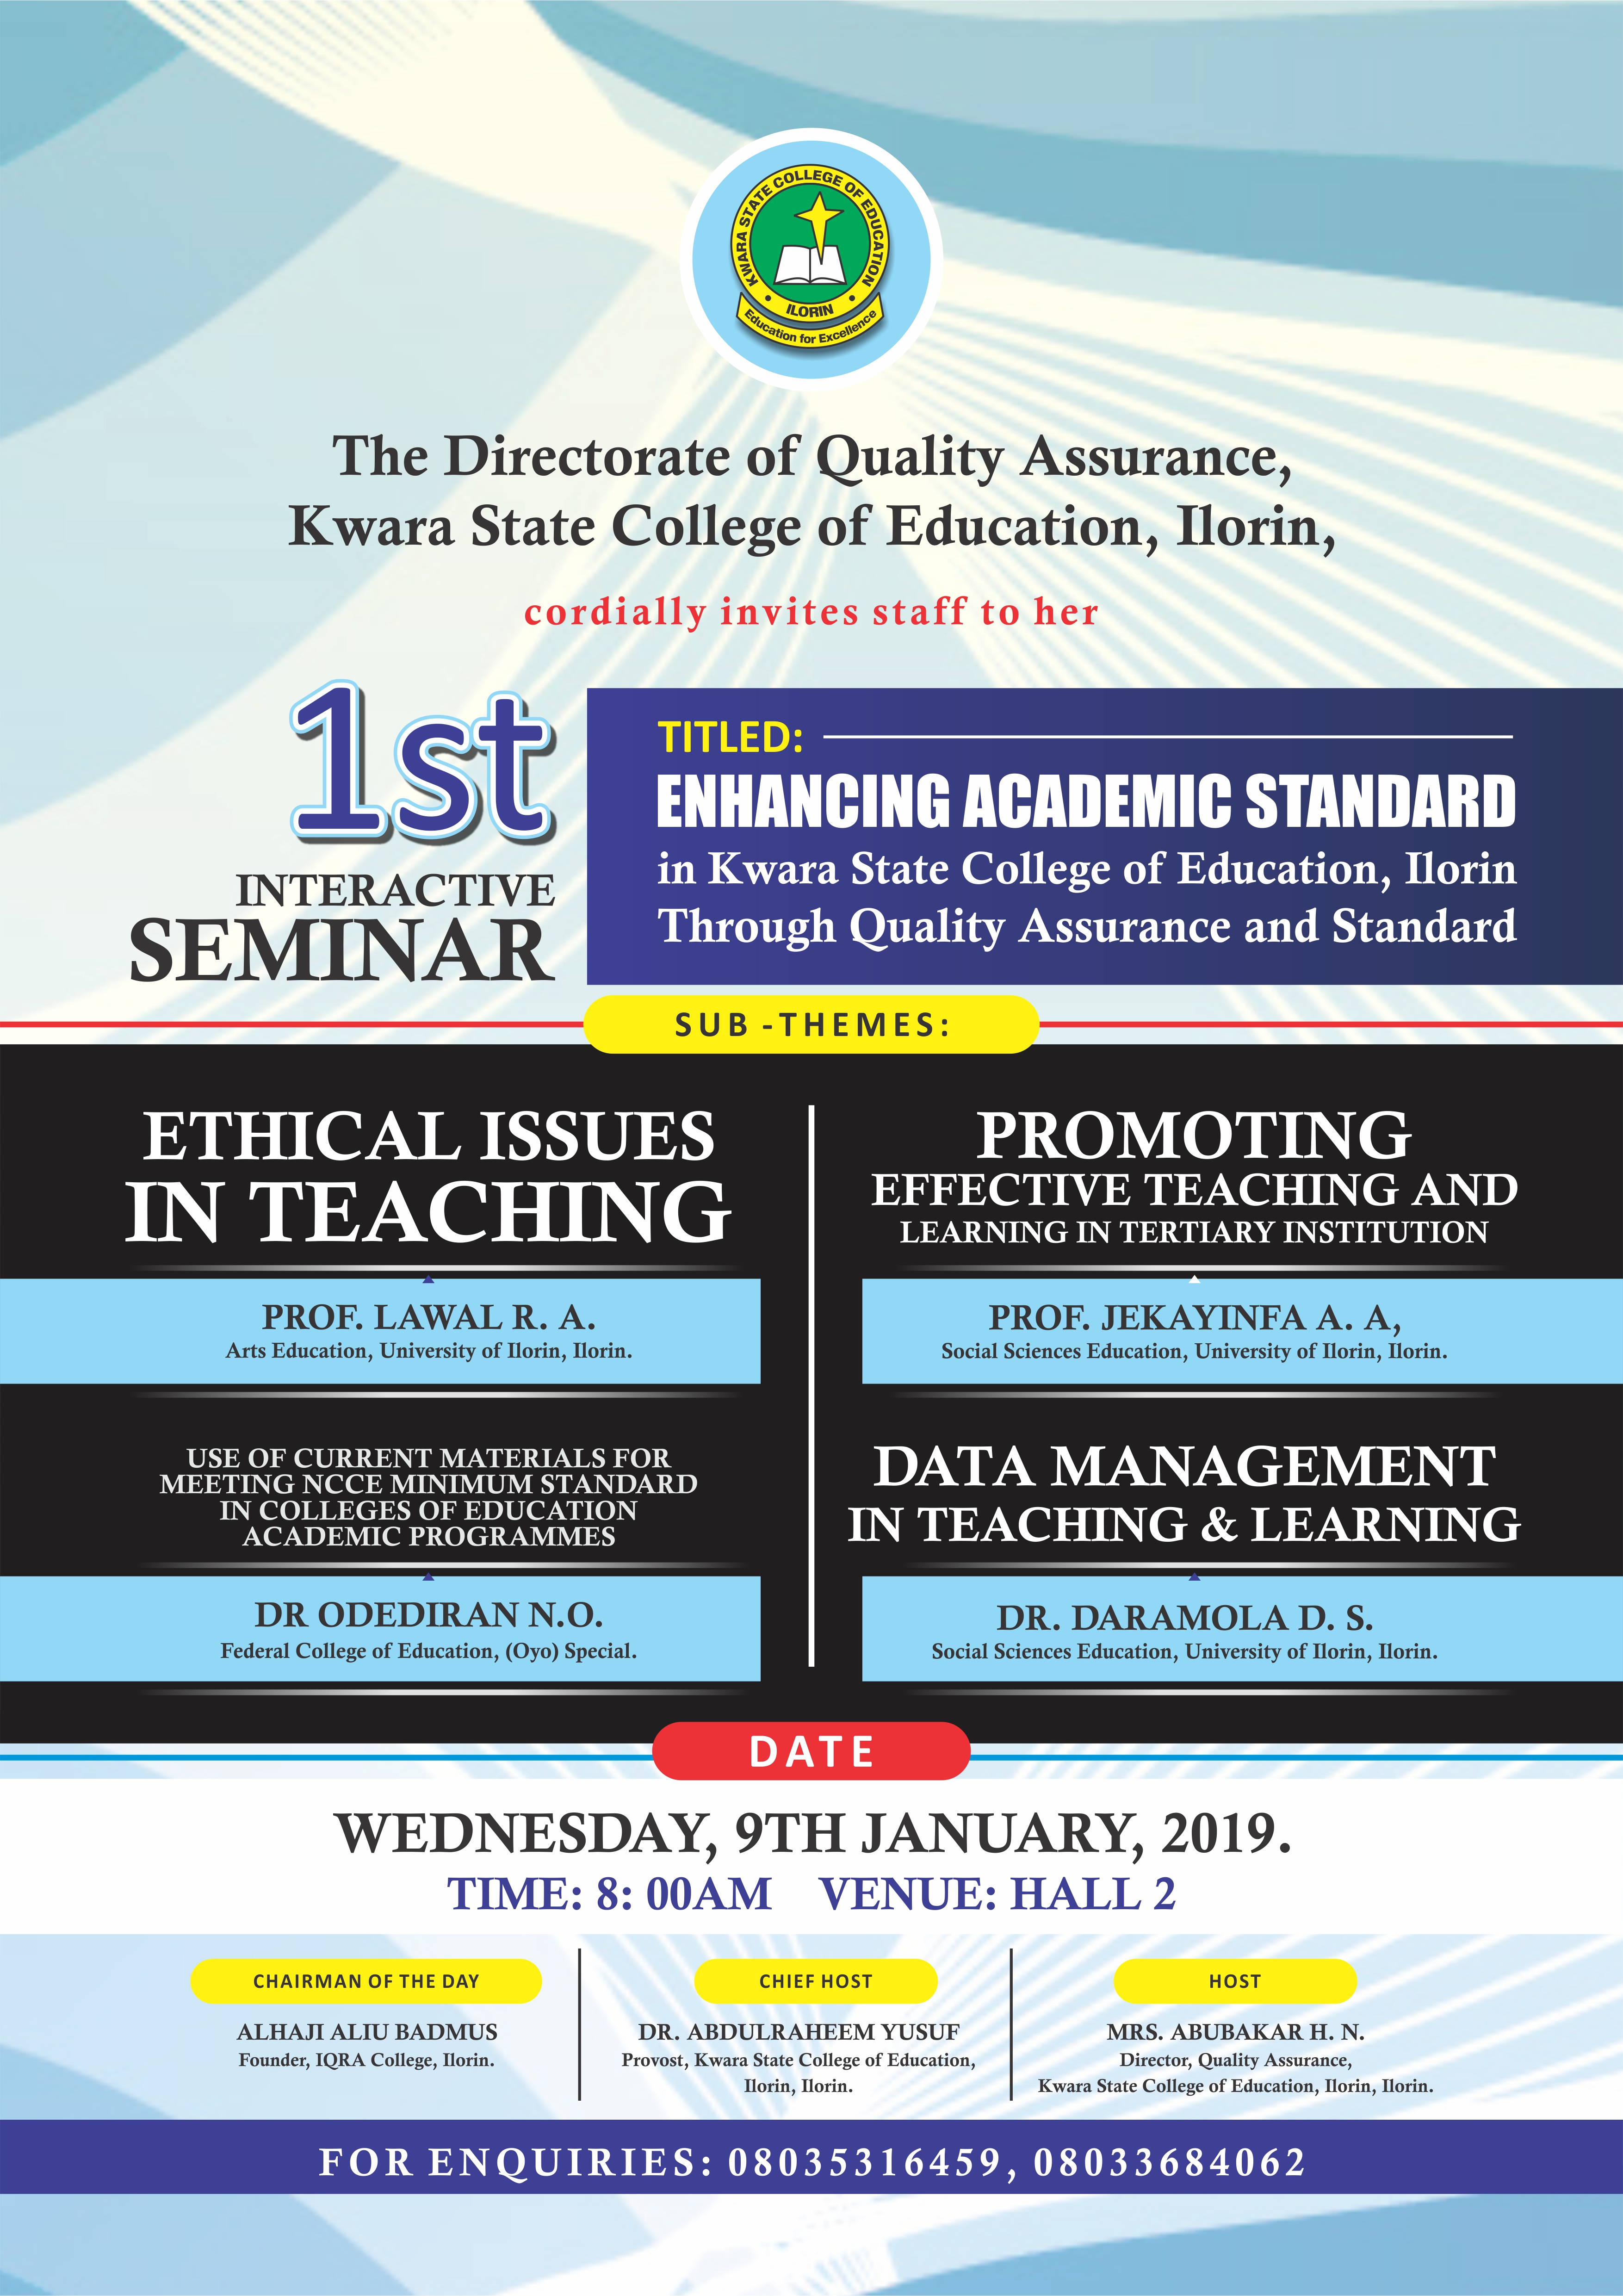 Seminar: Enhancing Academic Standard in Kwara State College of Education, Ilorin Through Quality Assurance and Standard